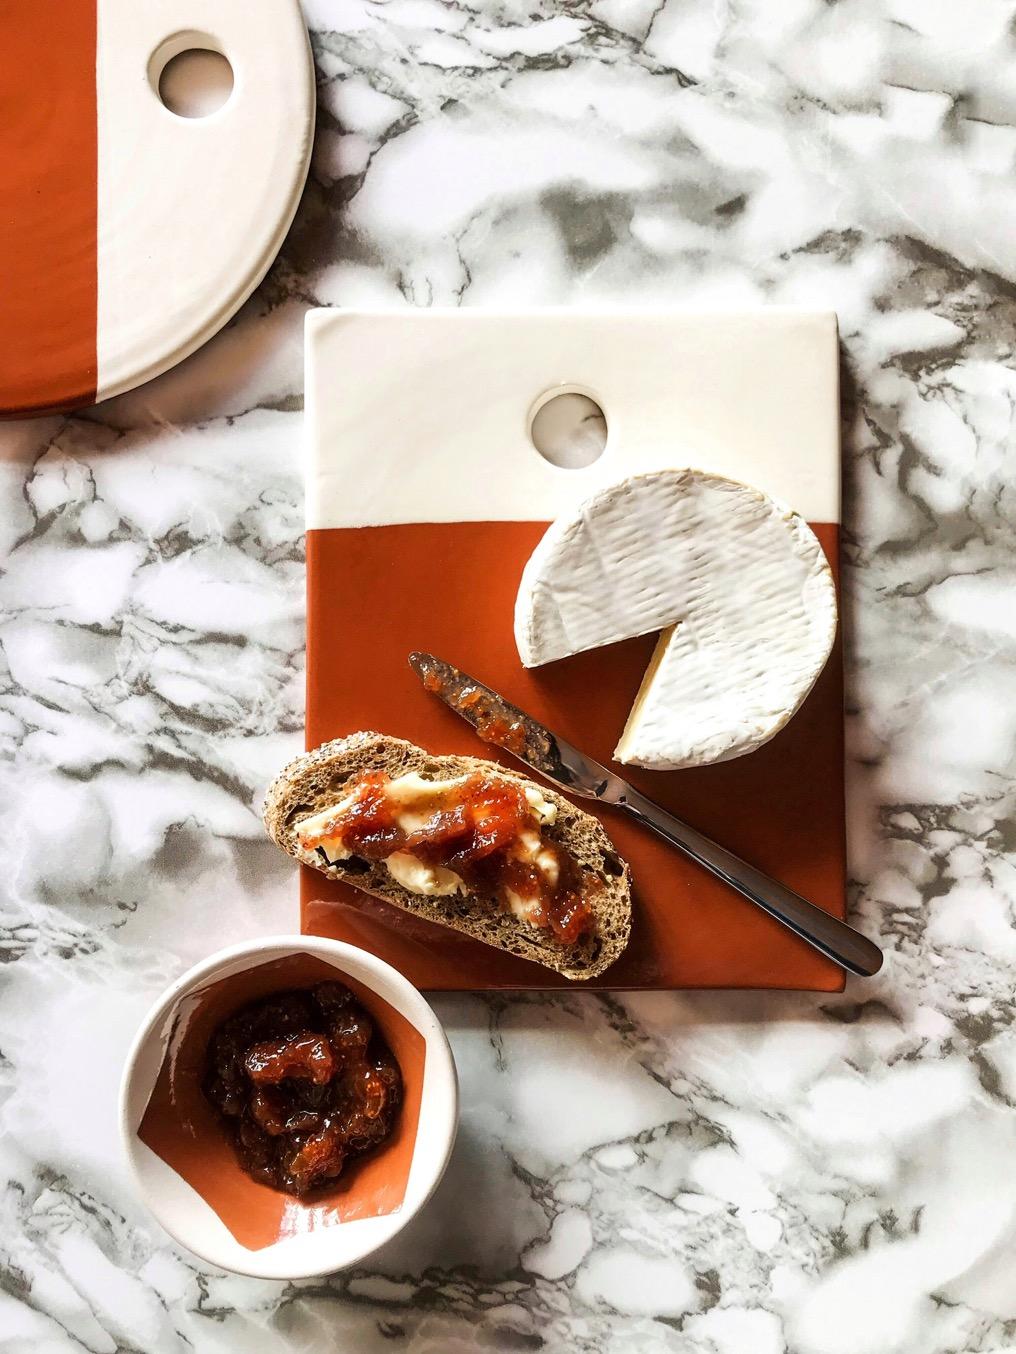 Handmade and hand painted ceramics from one of the mother countries, Portugal, these beautiful pieces for your table will add a modern and graphic touch and are perfect to mix and match. Perfect as a charcuterie board to serve all your favorite